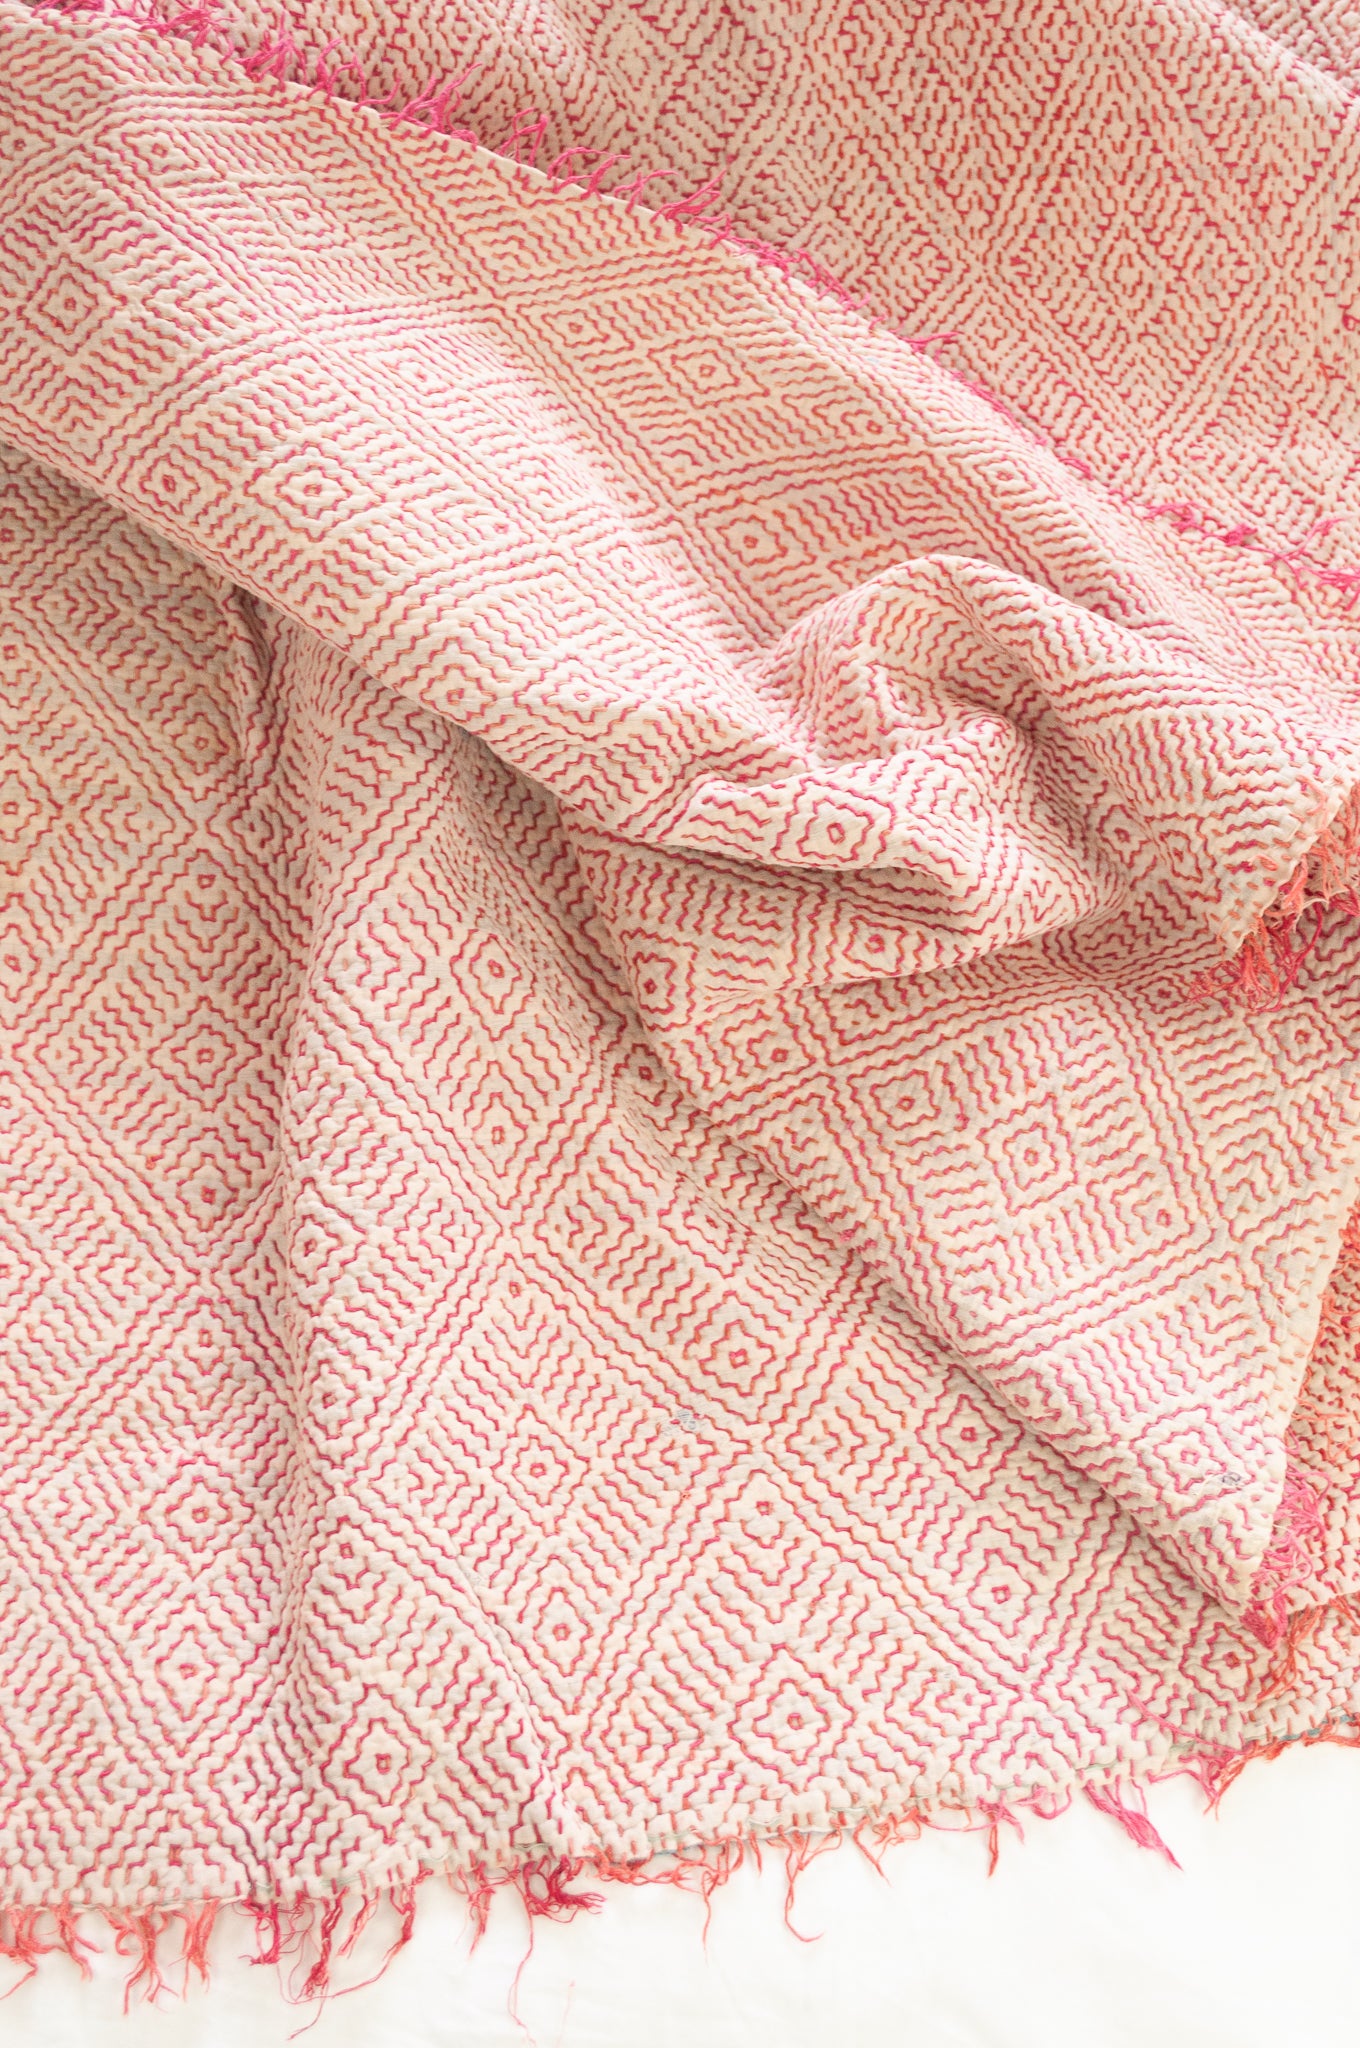 VIntage kantha quilt with  rose pink on white stitching and fringed edge.